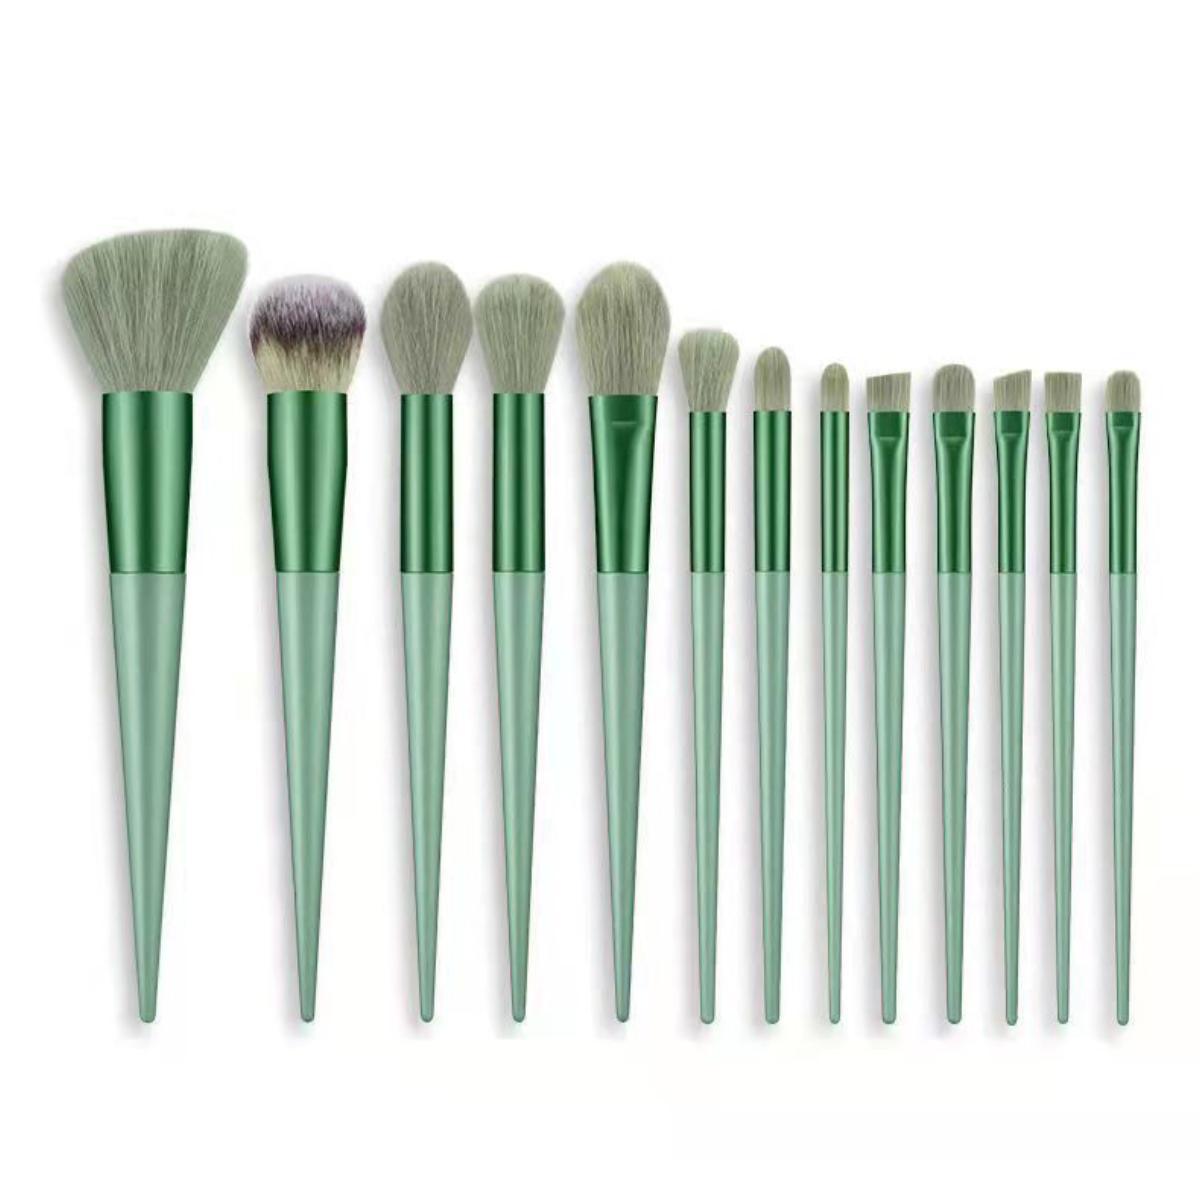 13 Pieces Makeup Brush Sets Blush Eye Shadow Concealer Foundation Loose Powder Highlighter Brush Full Set of Beauty Tools